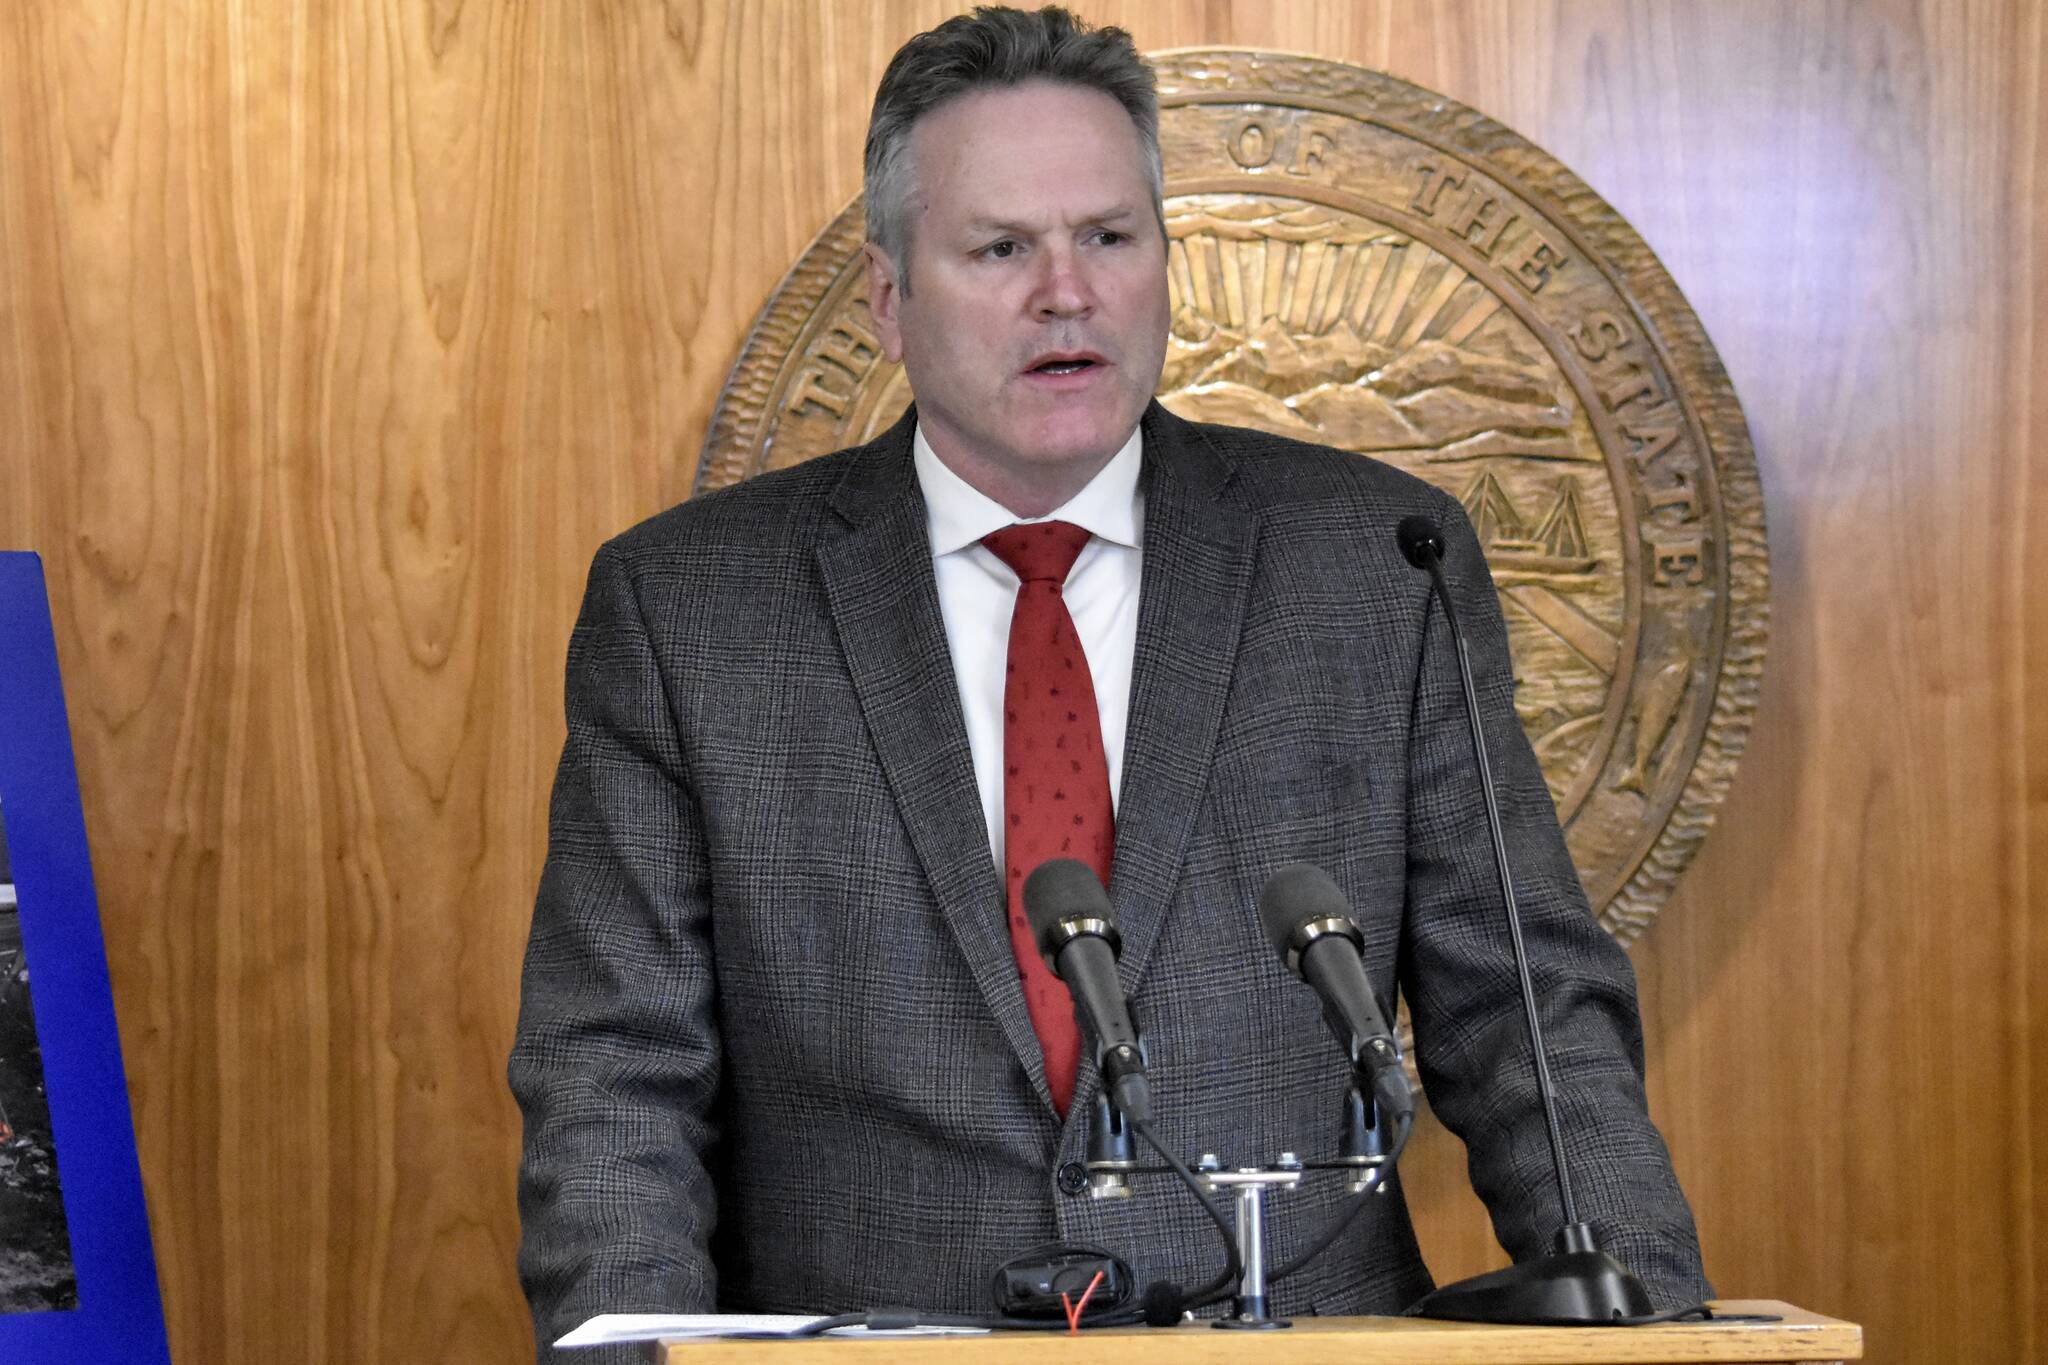 Gov. Mike Dunleavy, seen here speaking with reporters in the Cabinet Room at the Alaska State Capitol on March 8, 2022, spoke to the Empire recently about his approach to government after having served as Alaska’s chief executive. (Peter Segall / Juneau Empire file)